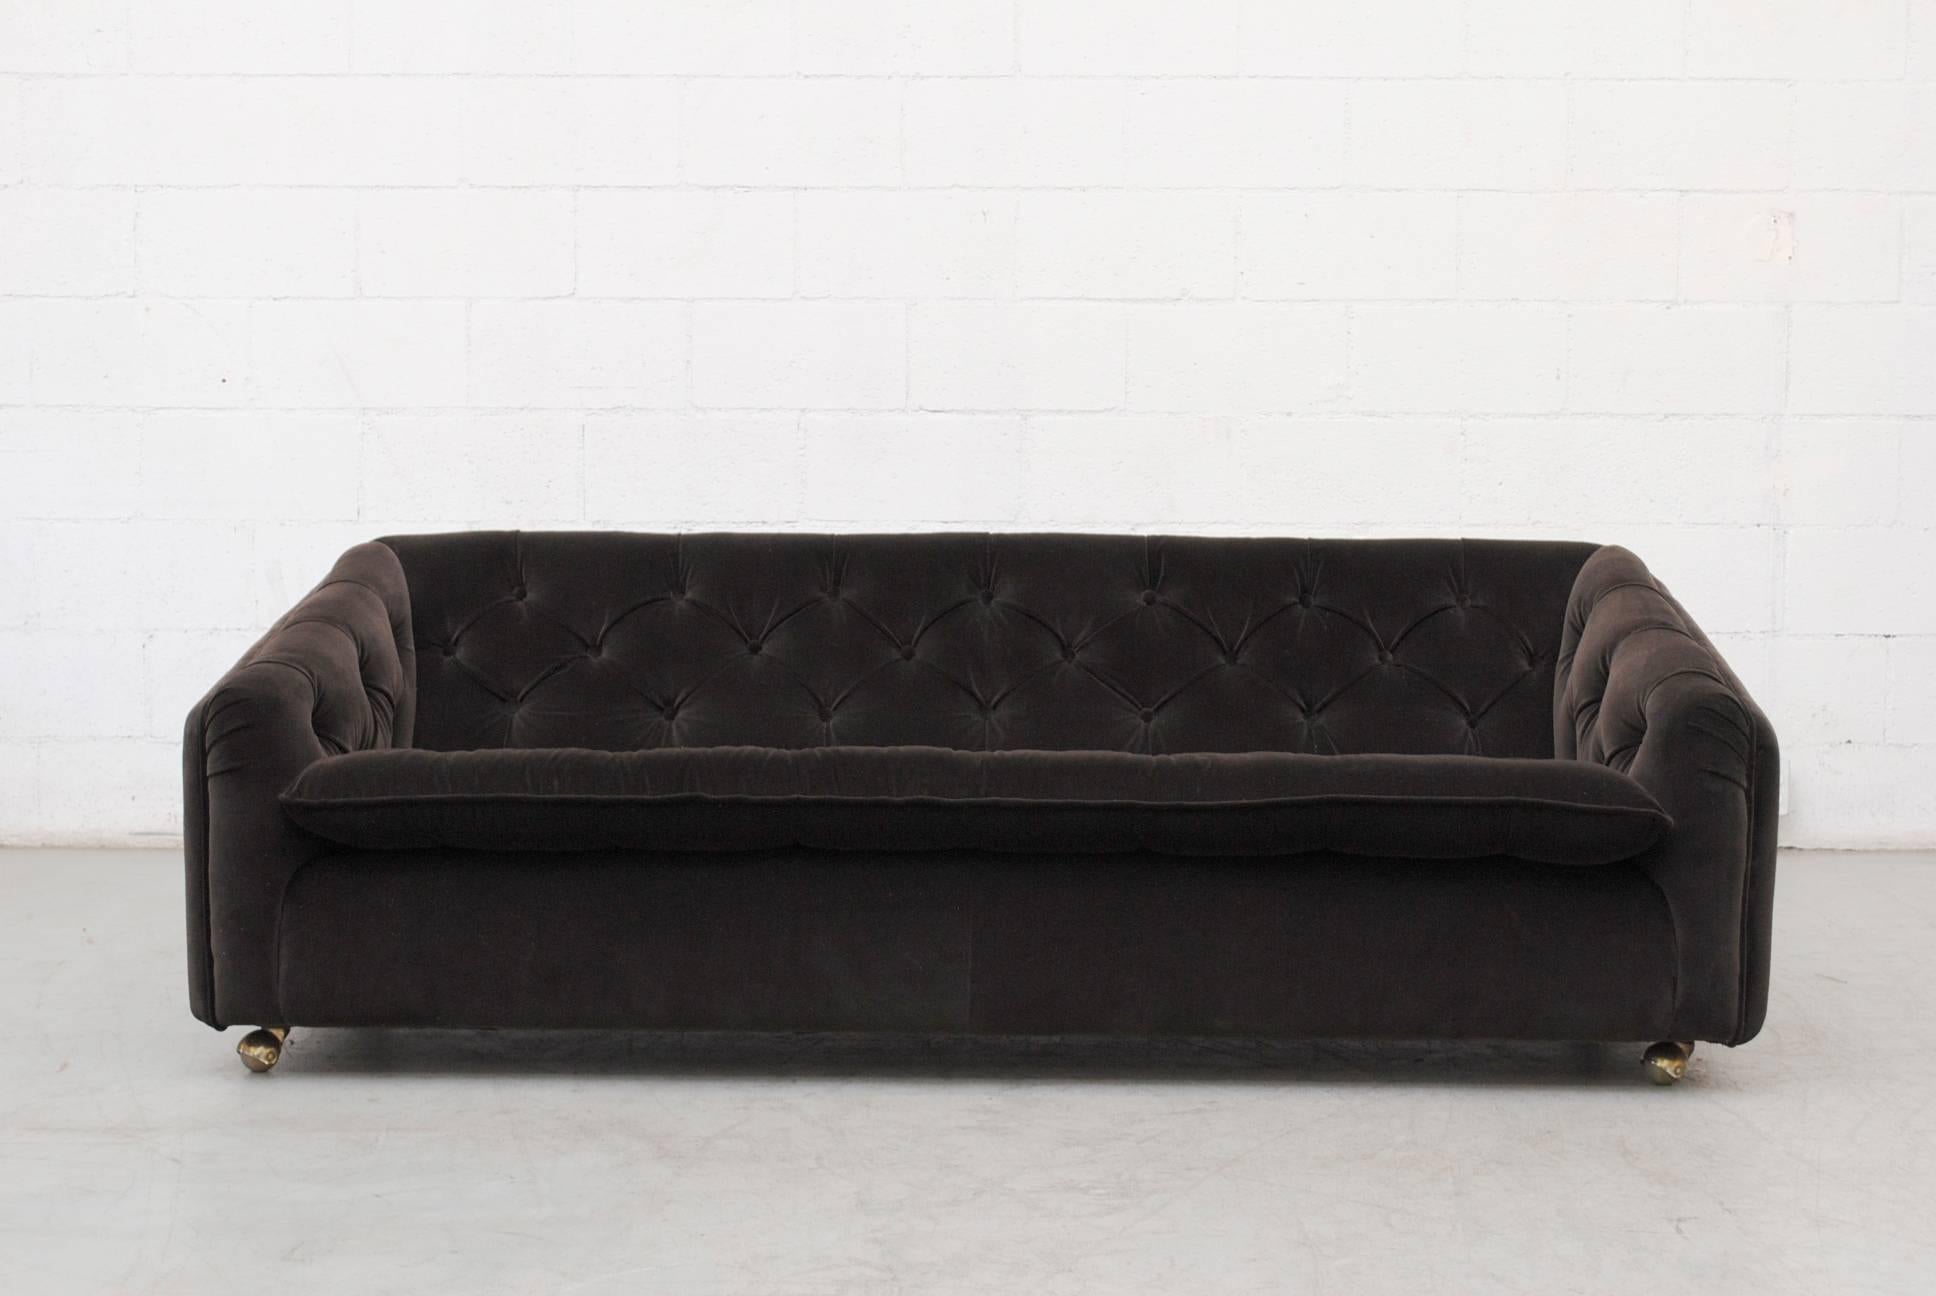 Three-seat sofa for Artifort newly upholstered in dark grey tufted velvet on four metal caster wheels. Matching lounge chair available. Sold separately.